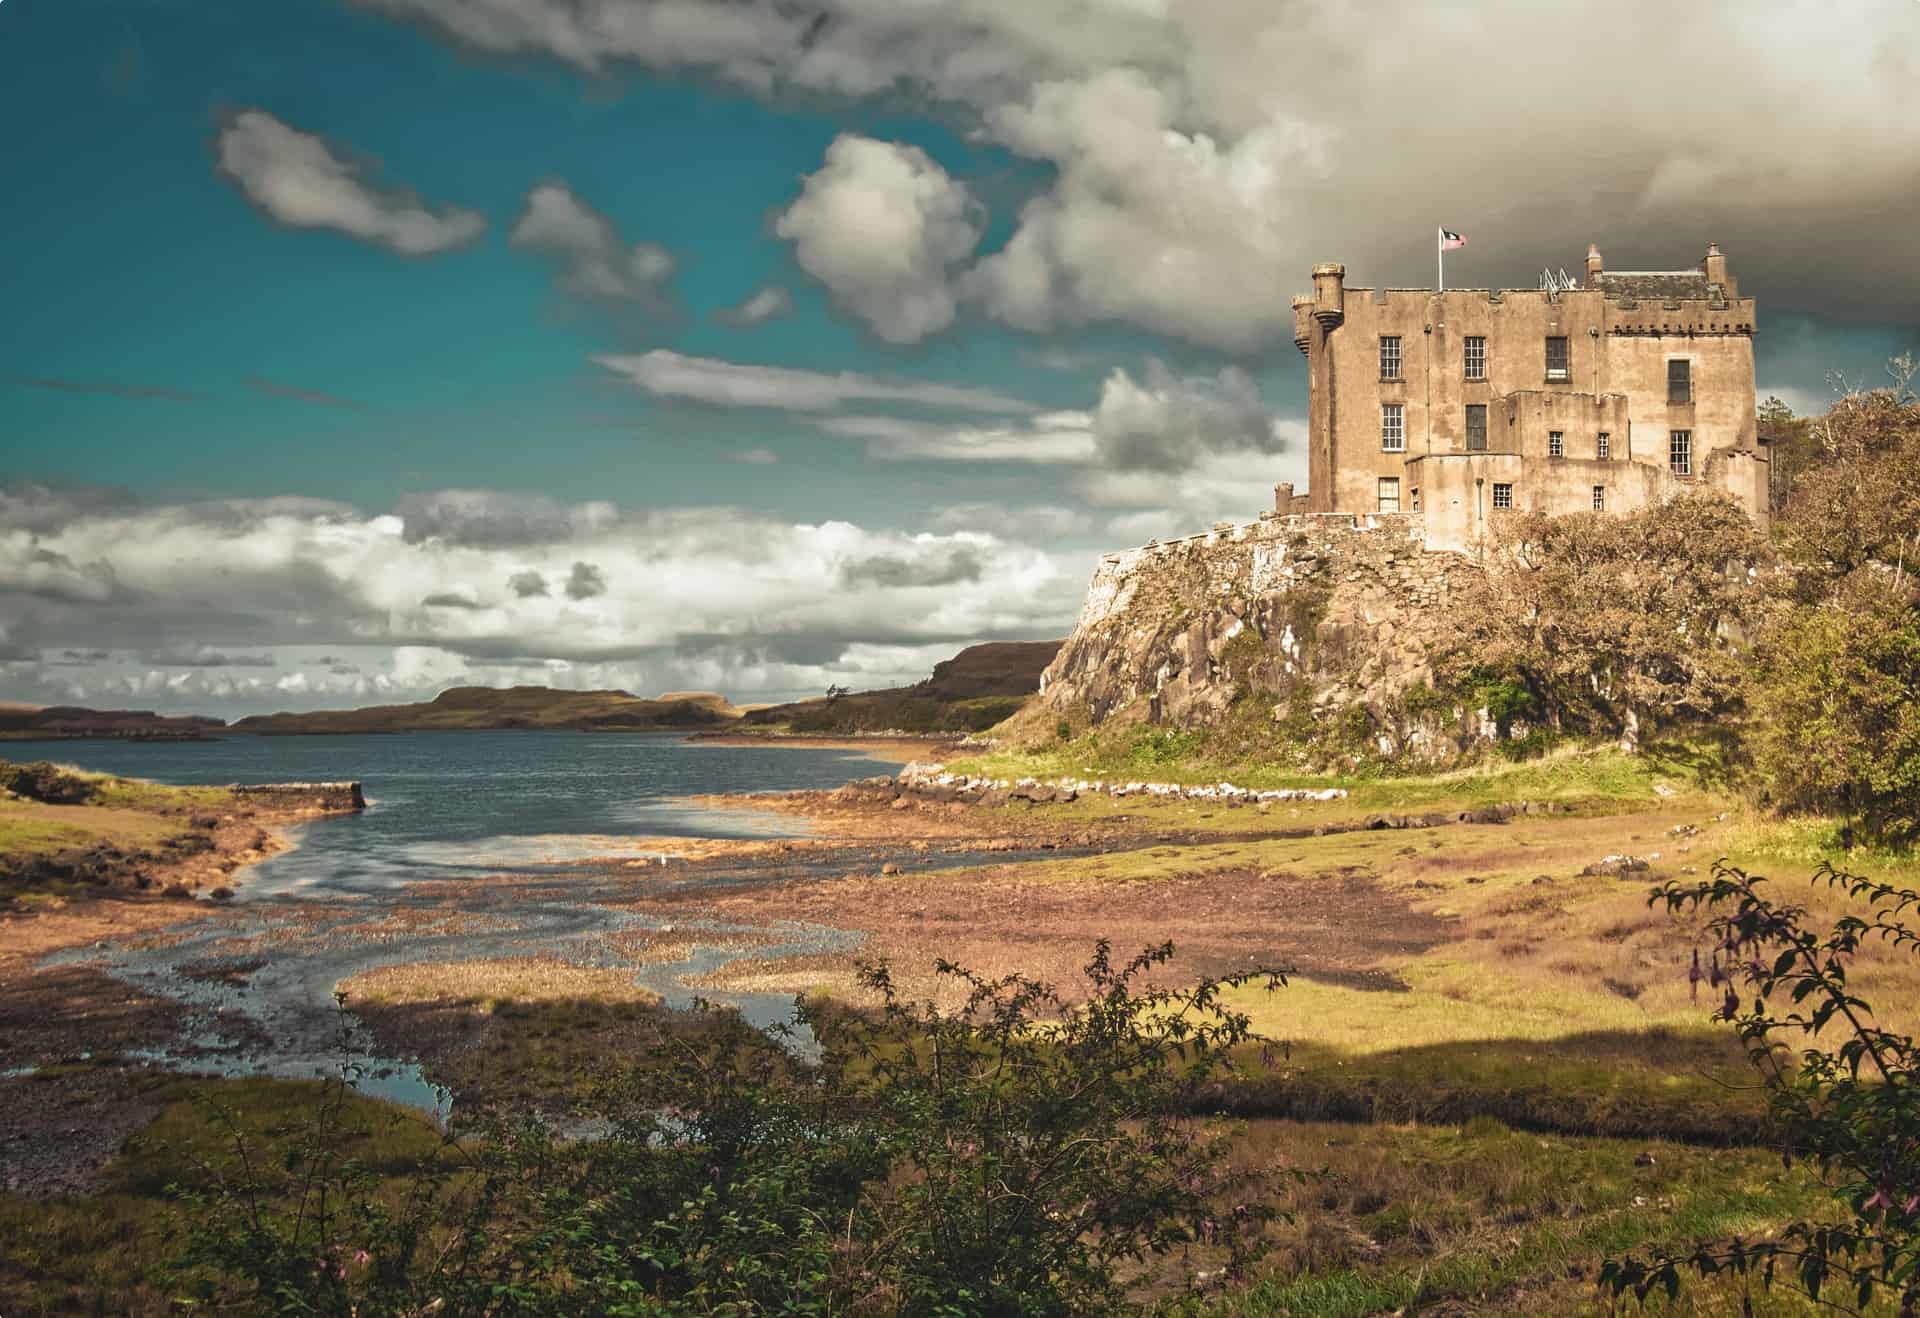 Dunvegan Castle, located off the west coast of Scotland